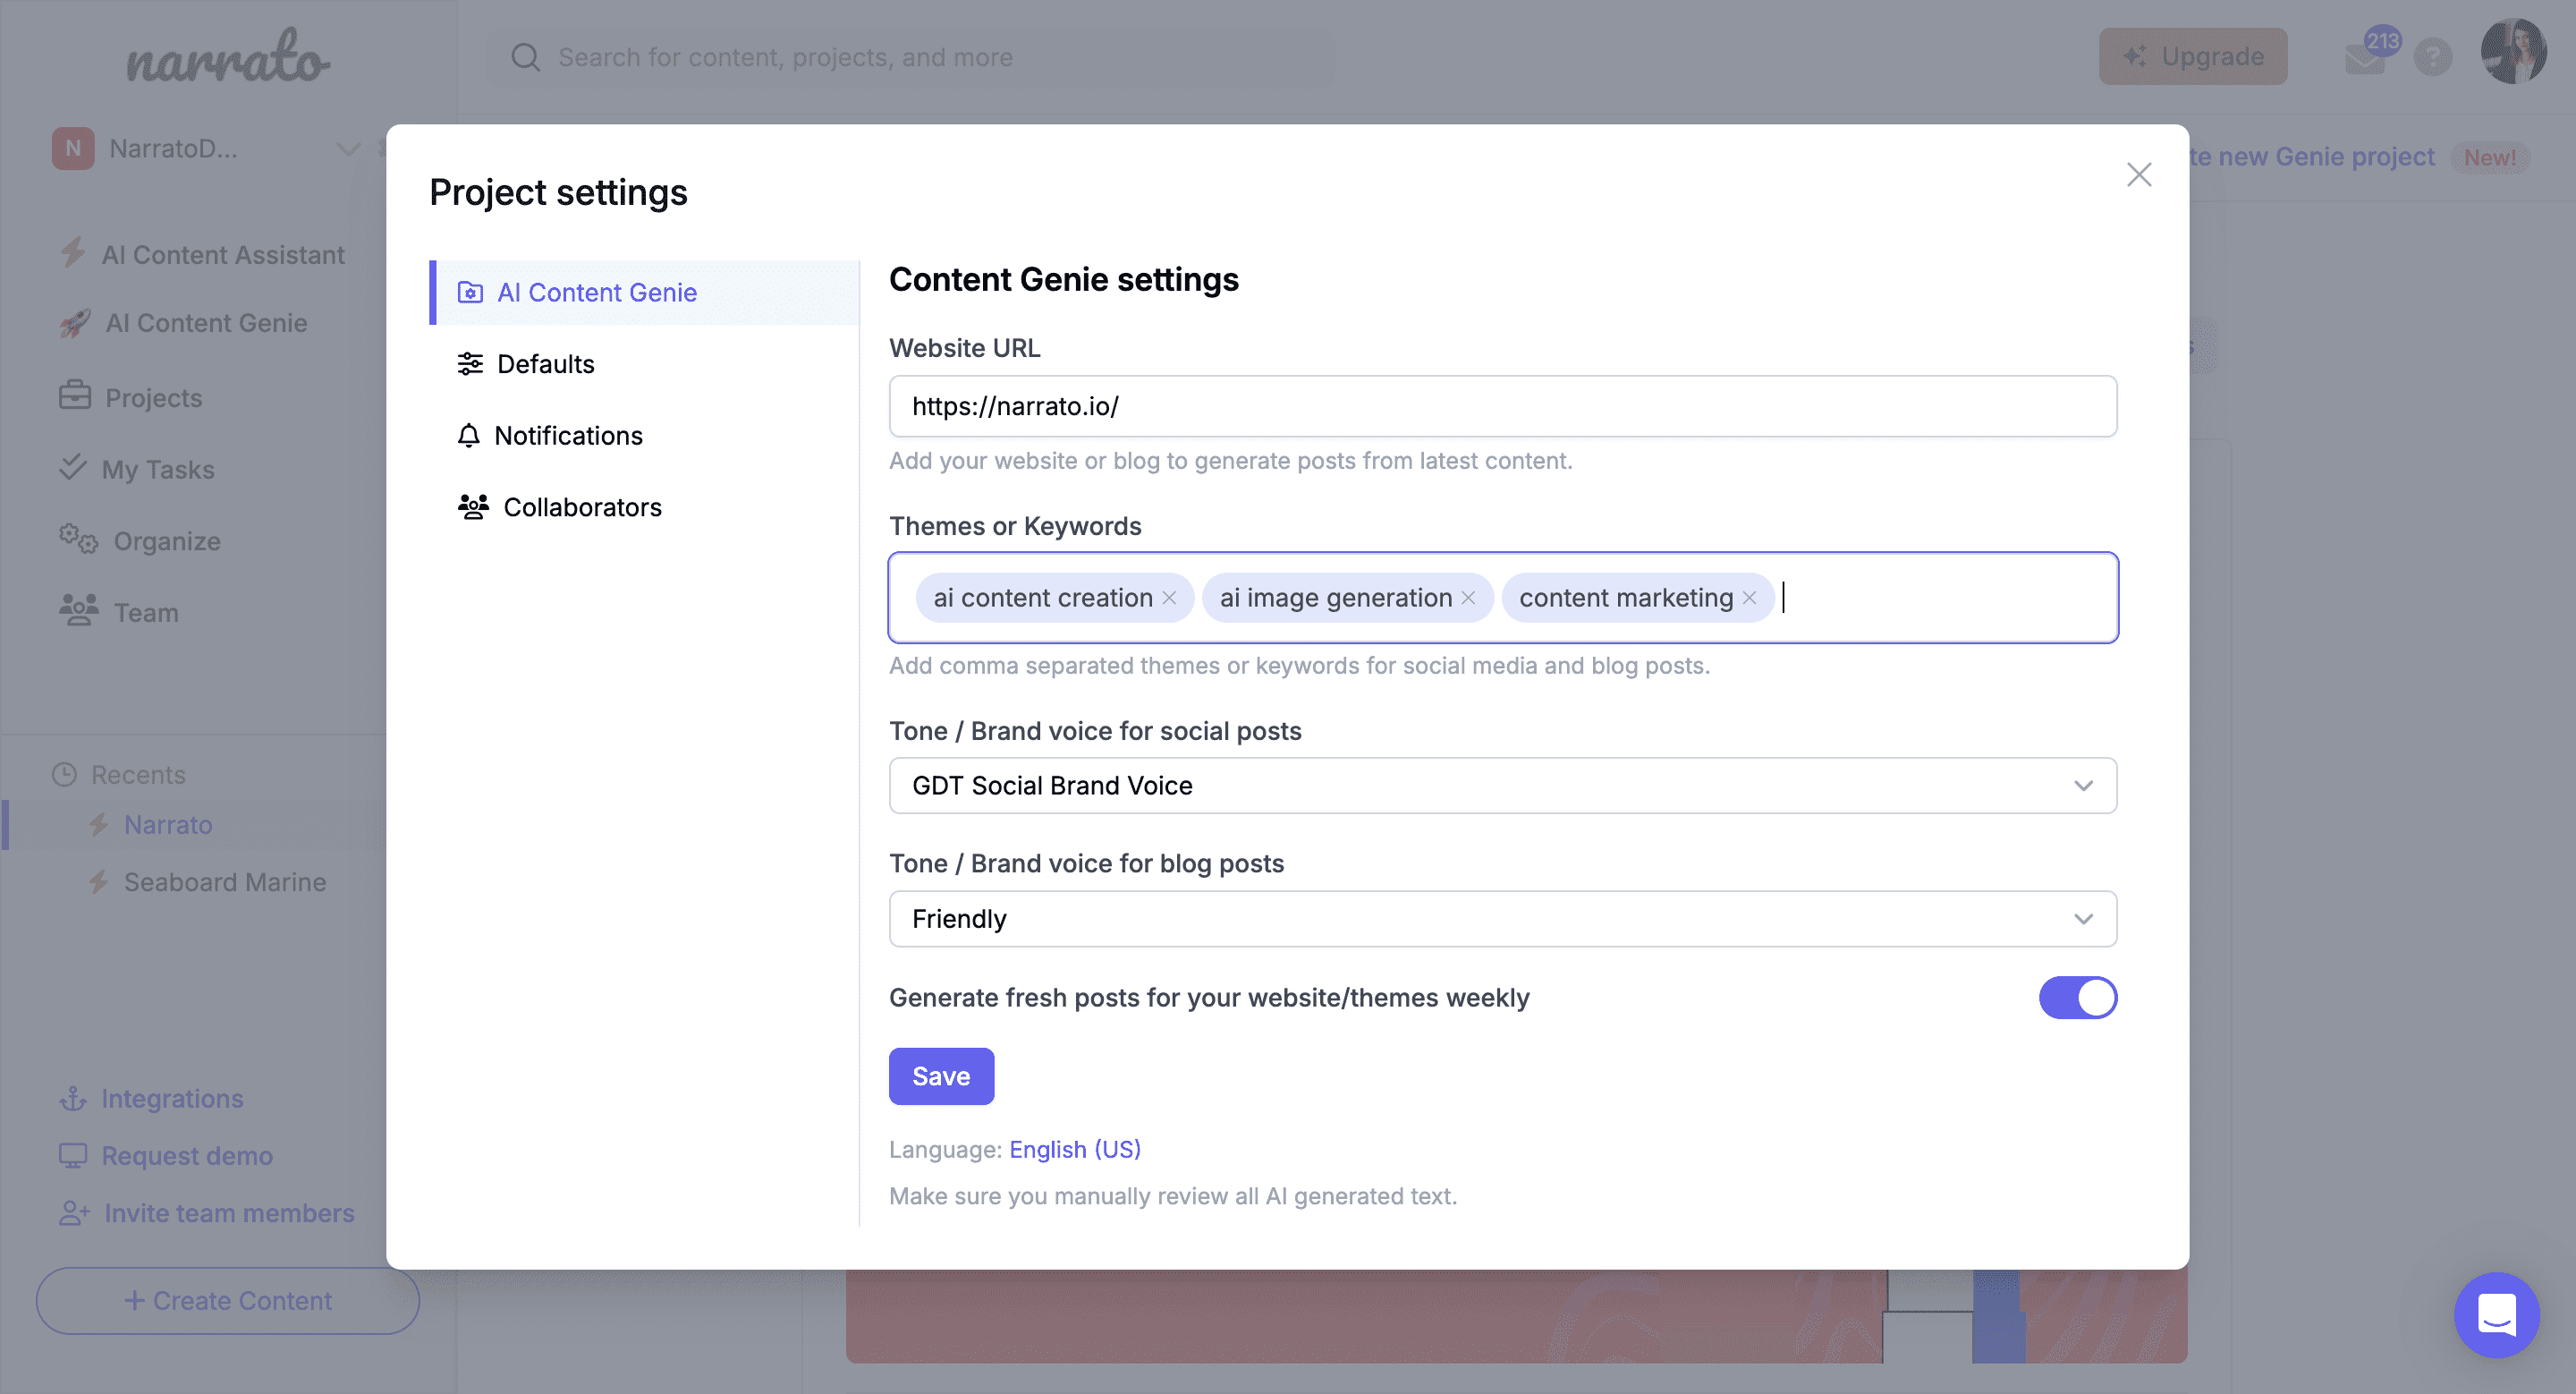 Adjusting the settings on AI Content Genie